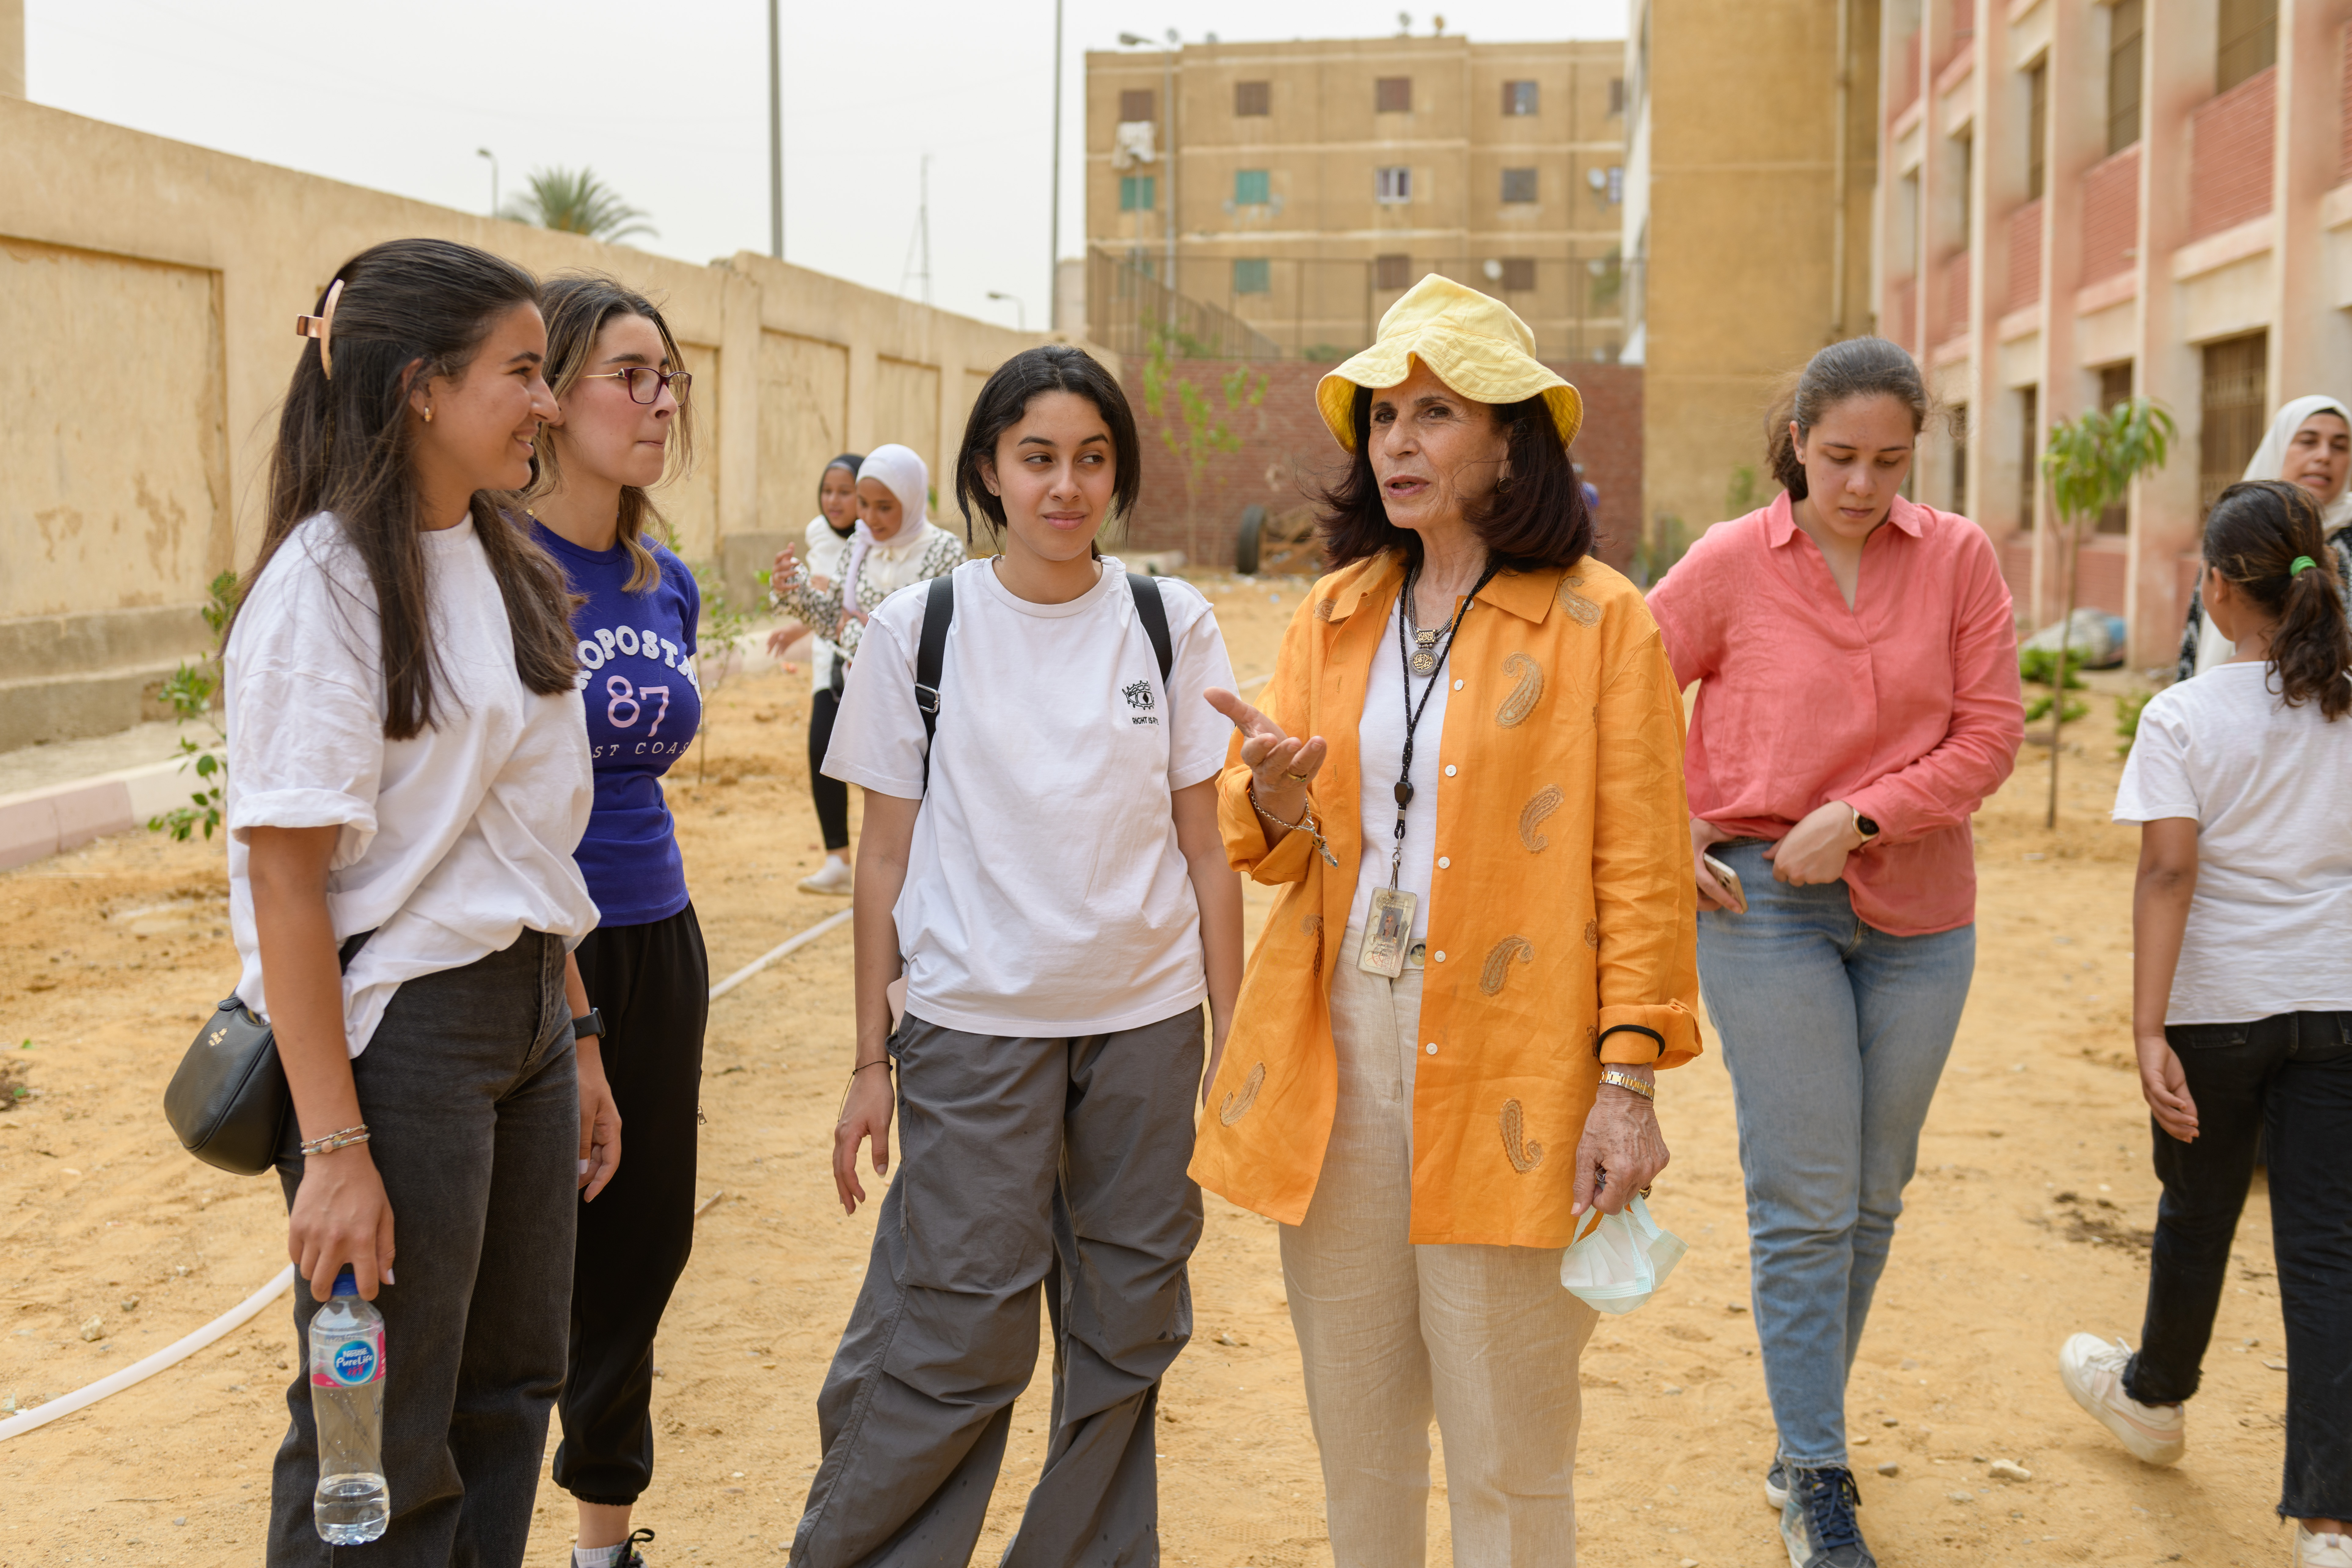 a woman in an orange shirt speaks with students in the yard of a school